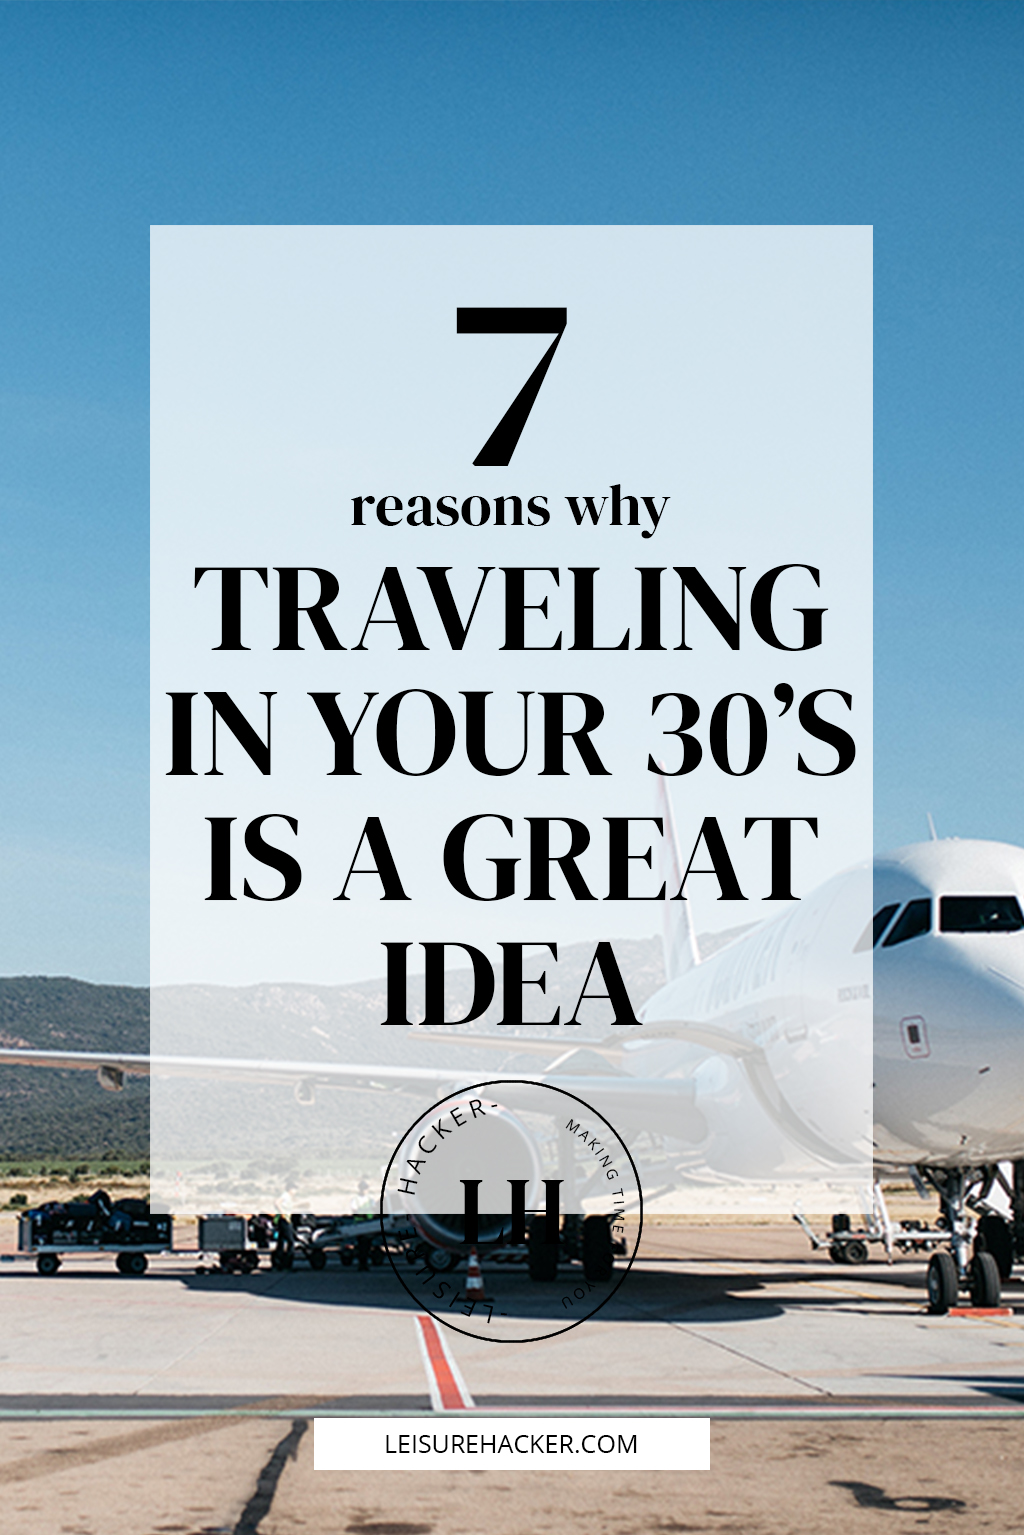 7 reasons why traveling in your 30s is a great idea